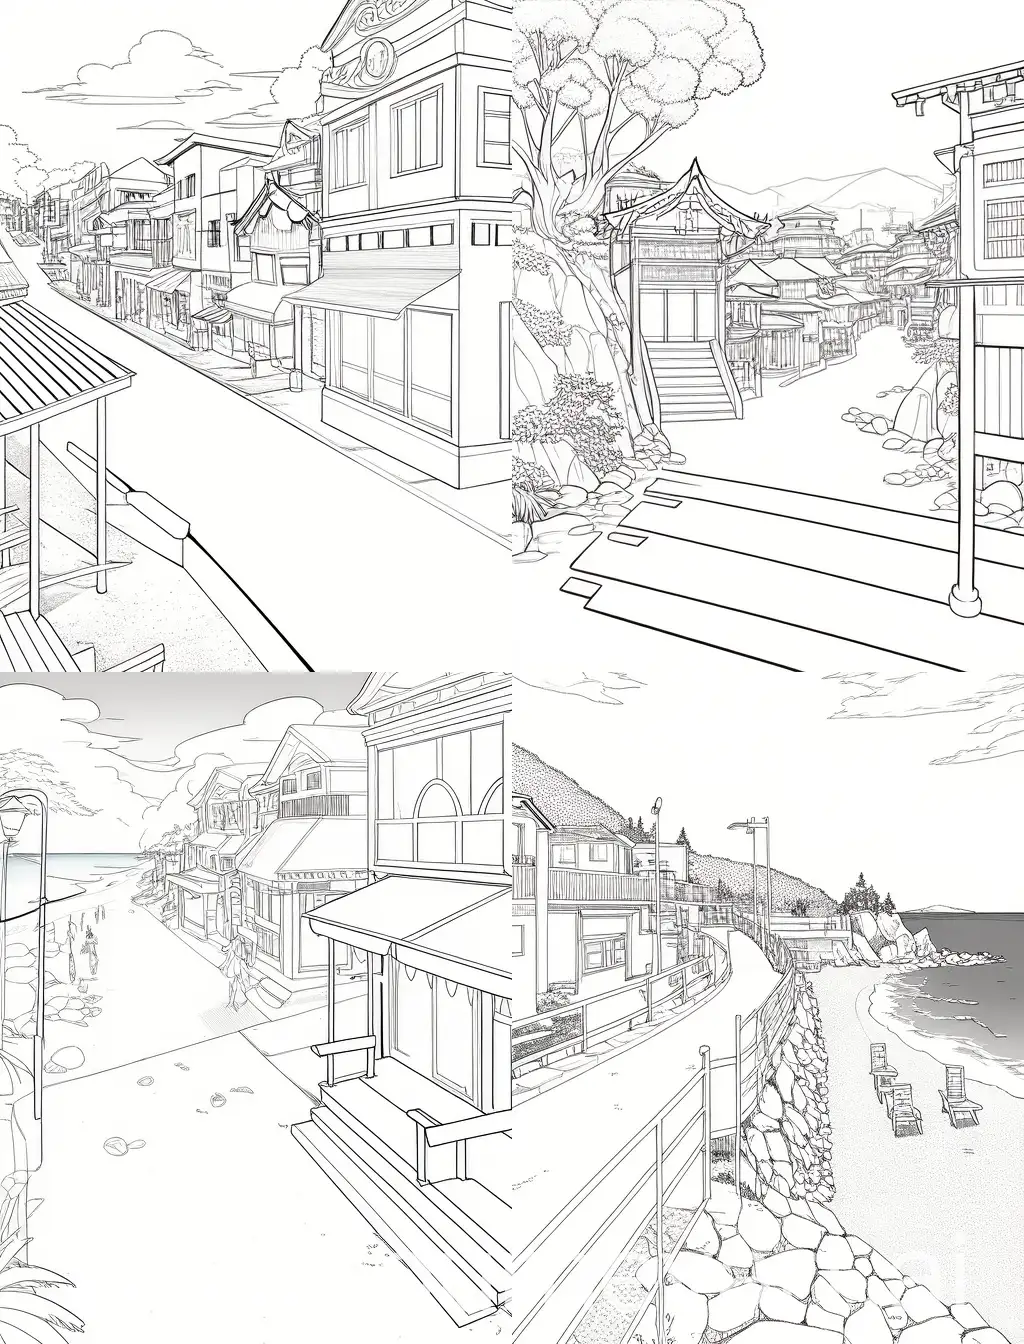 Summer-Beach-Town-Coloring-Page-Niji-4-Series-Artistic-Black-and-White-Illustration